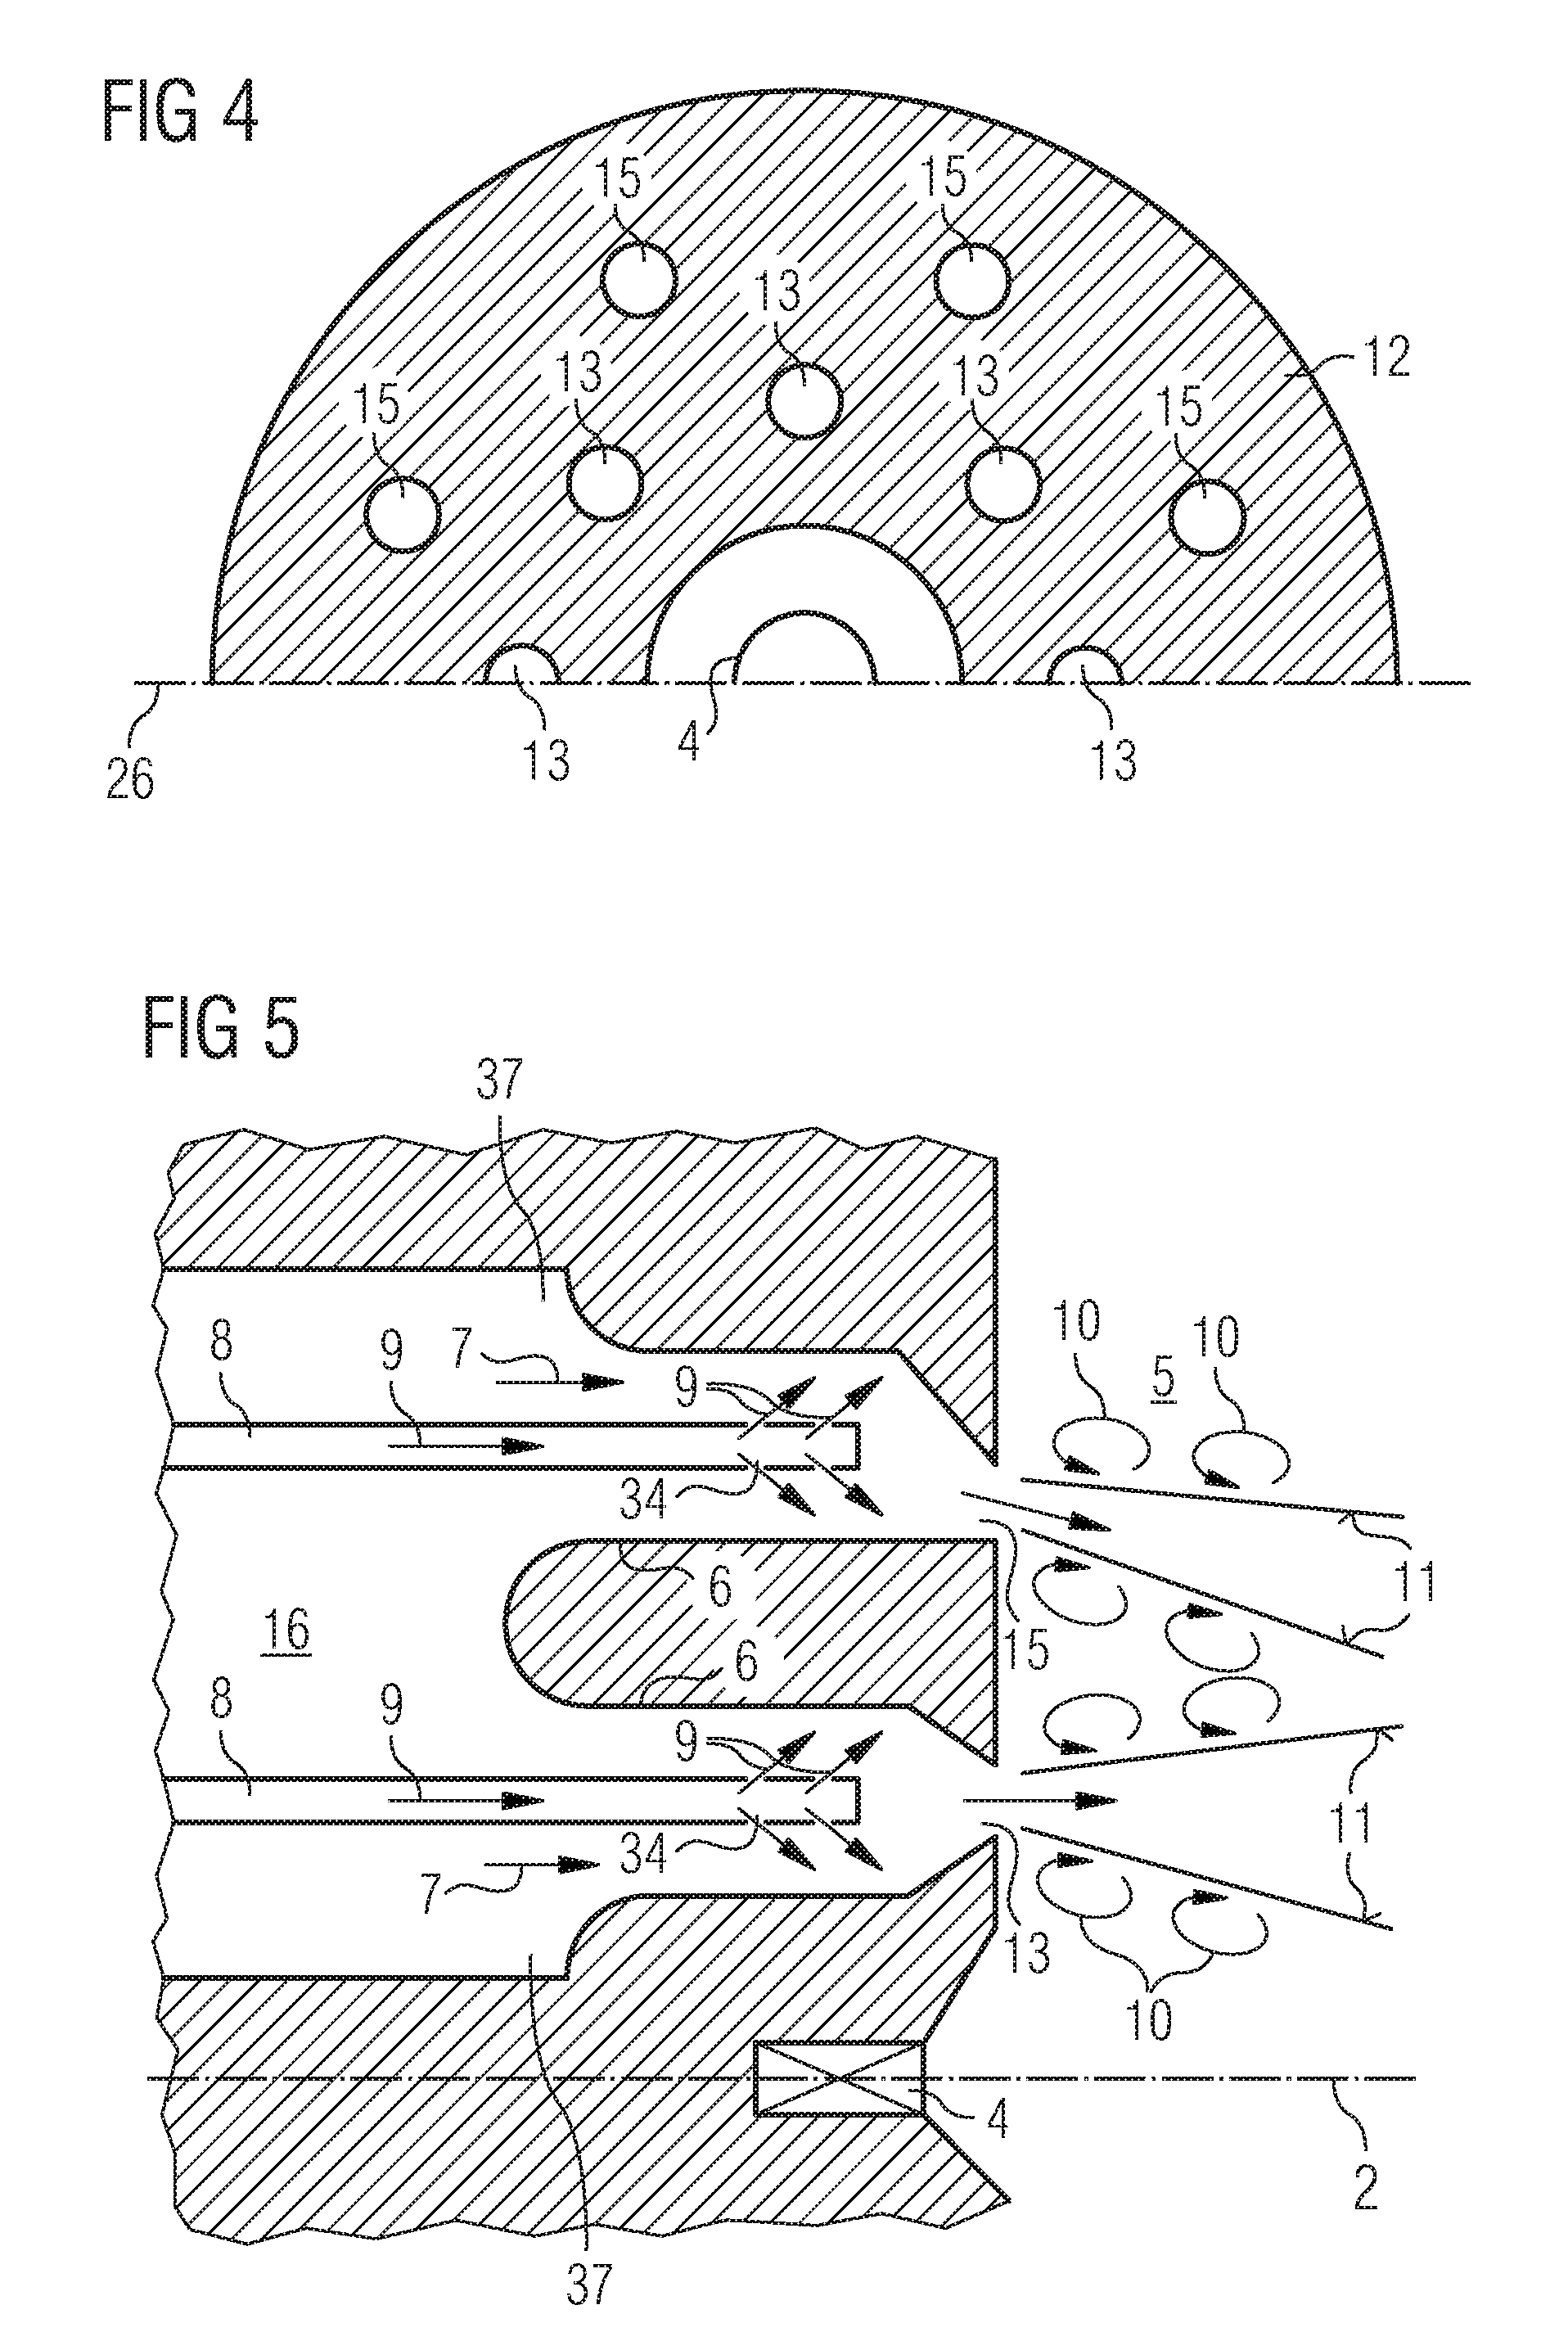 Non-rotational stabilization of the flame of a premixing burner